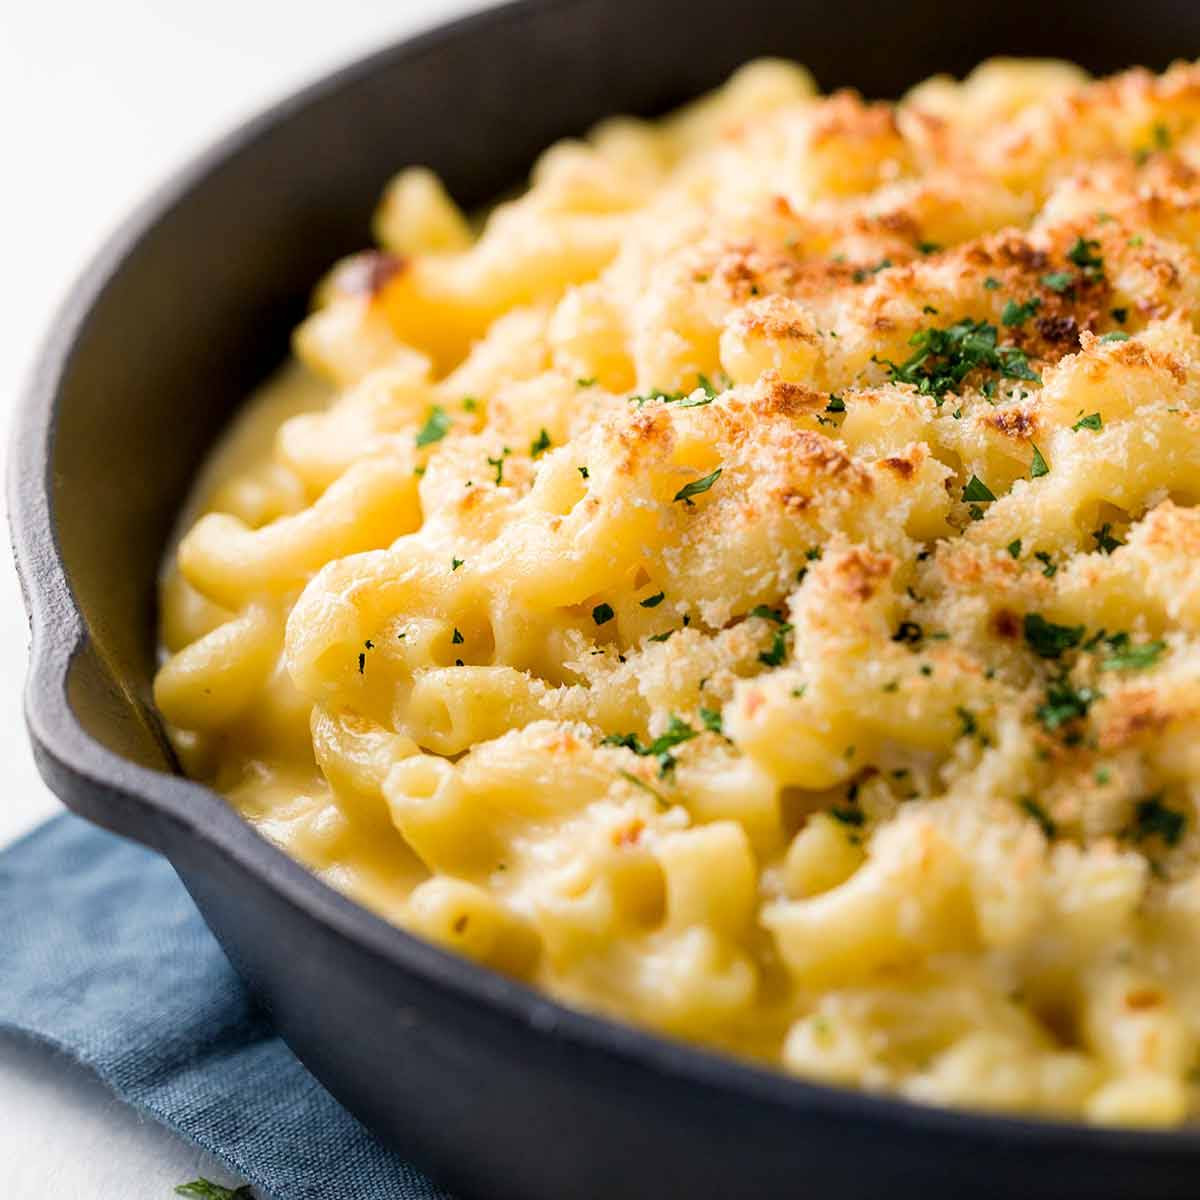 Baked Macaroni And Cheese Bread Crumbs
 10 Best Baked Macaroni and Cheese with Bread Crumbs Recipes